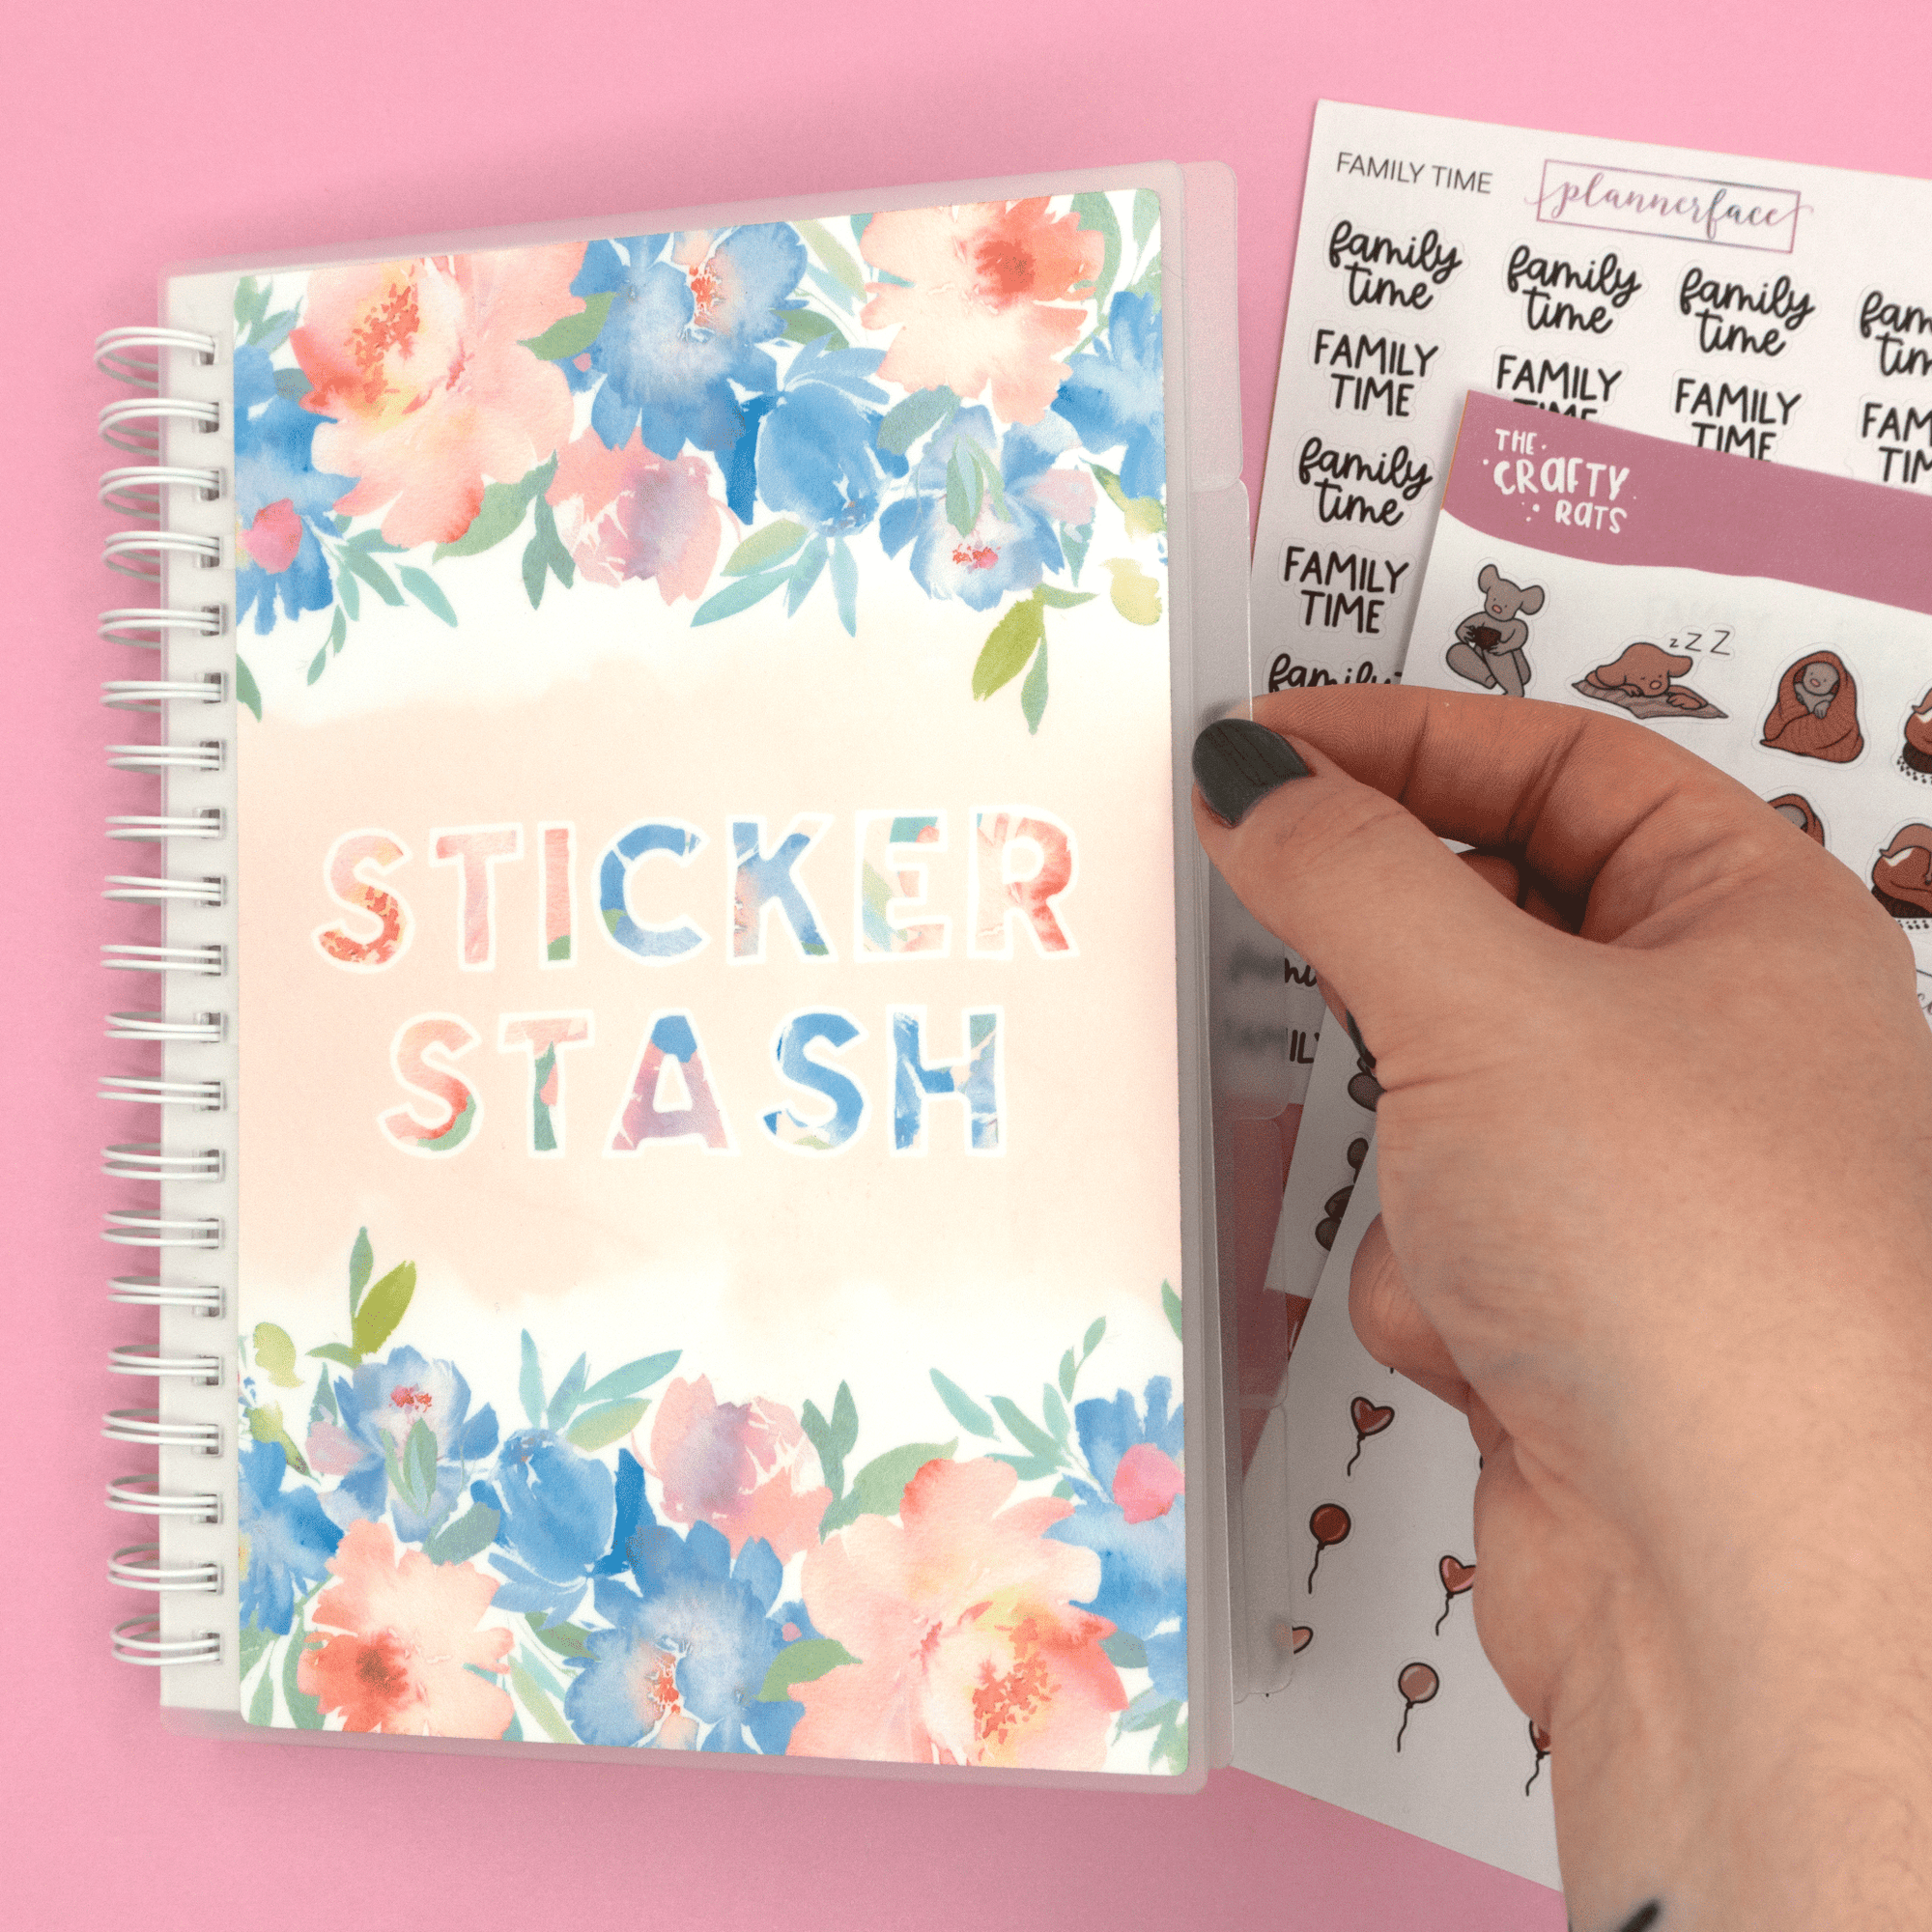 Clear Divider Set for Reusable Sticker Albums by Plannerface